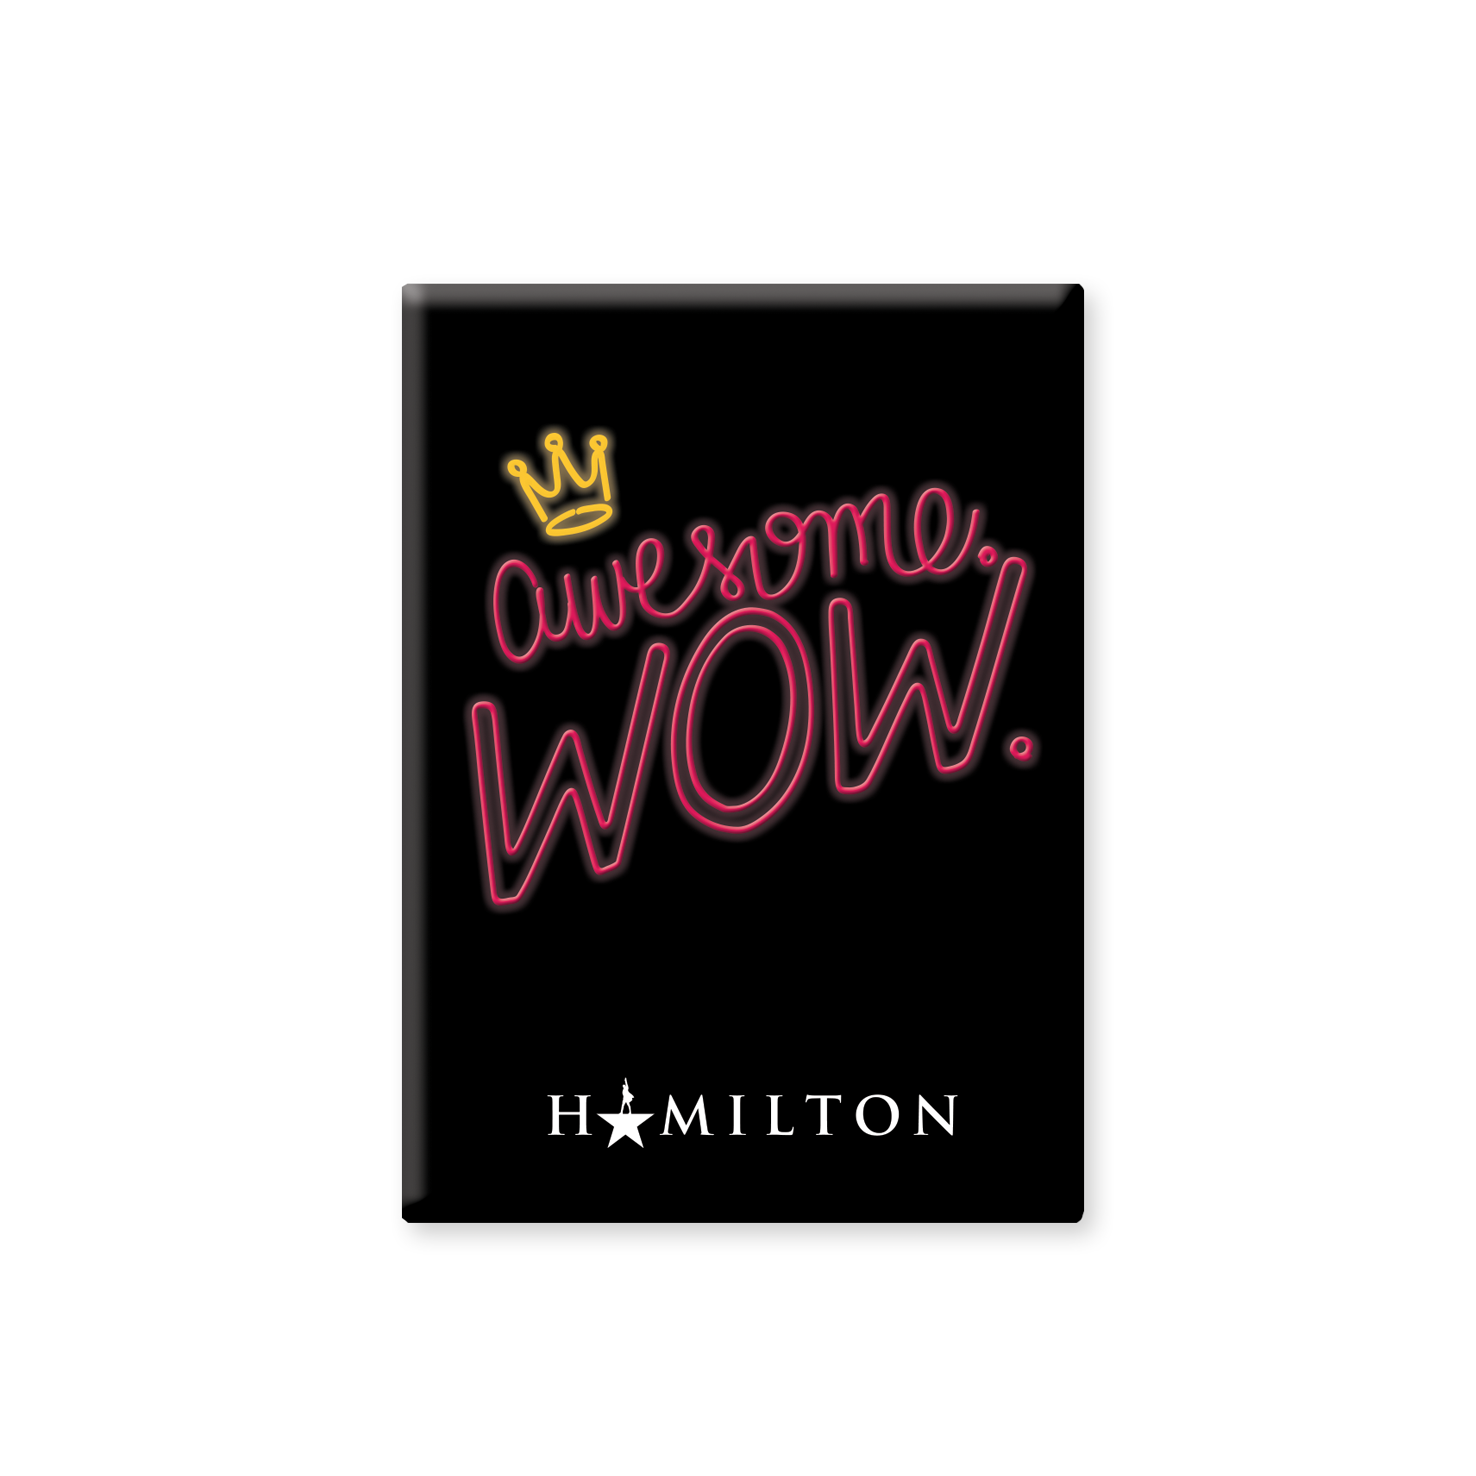 HAMILTON Awesome Wow Button Magnet Image